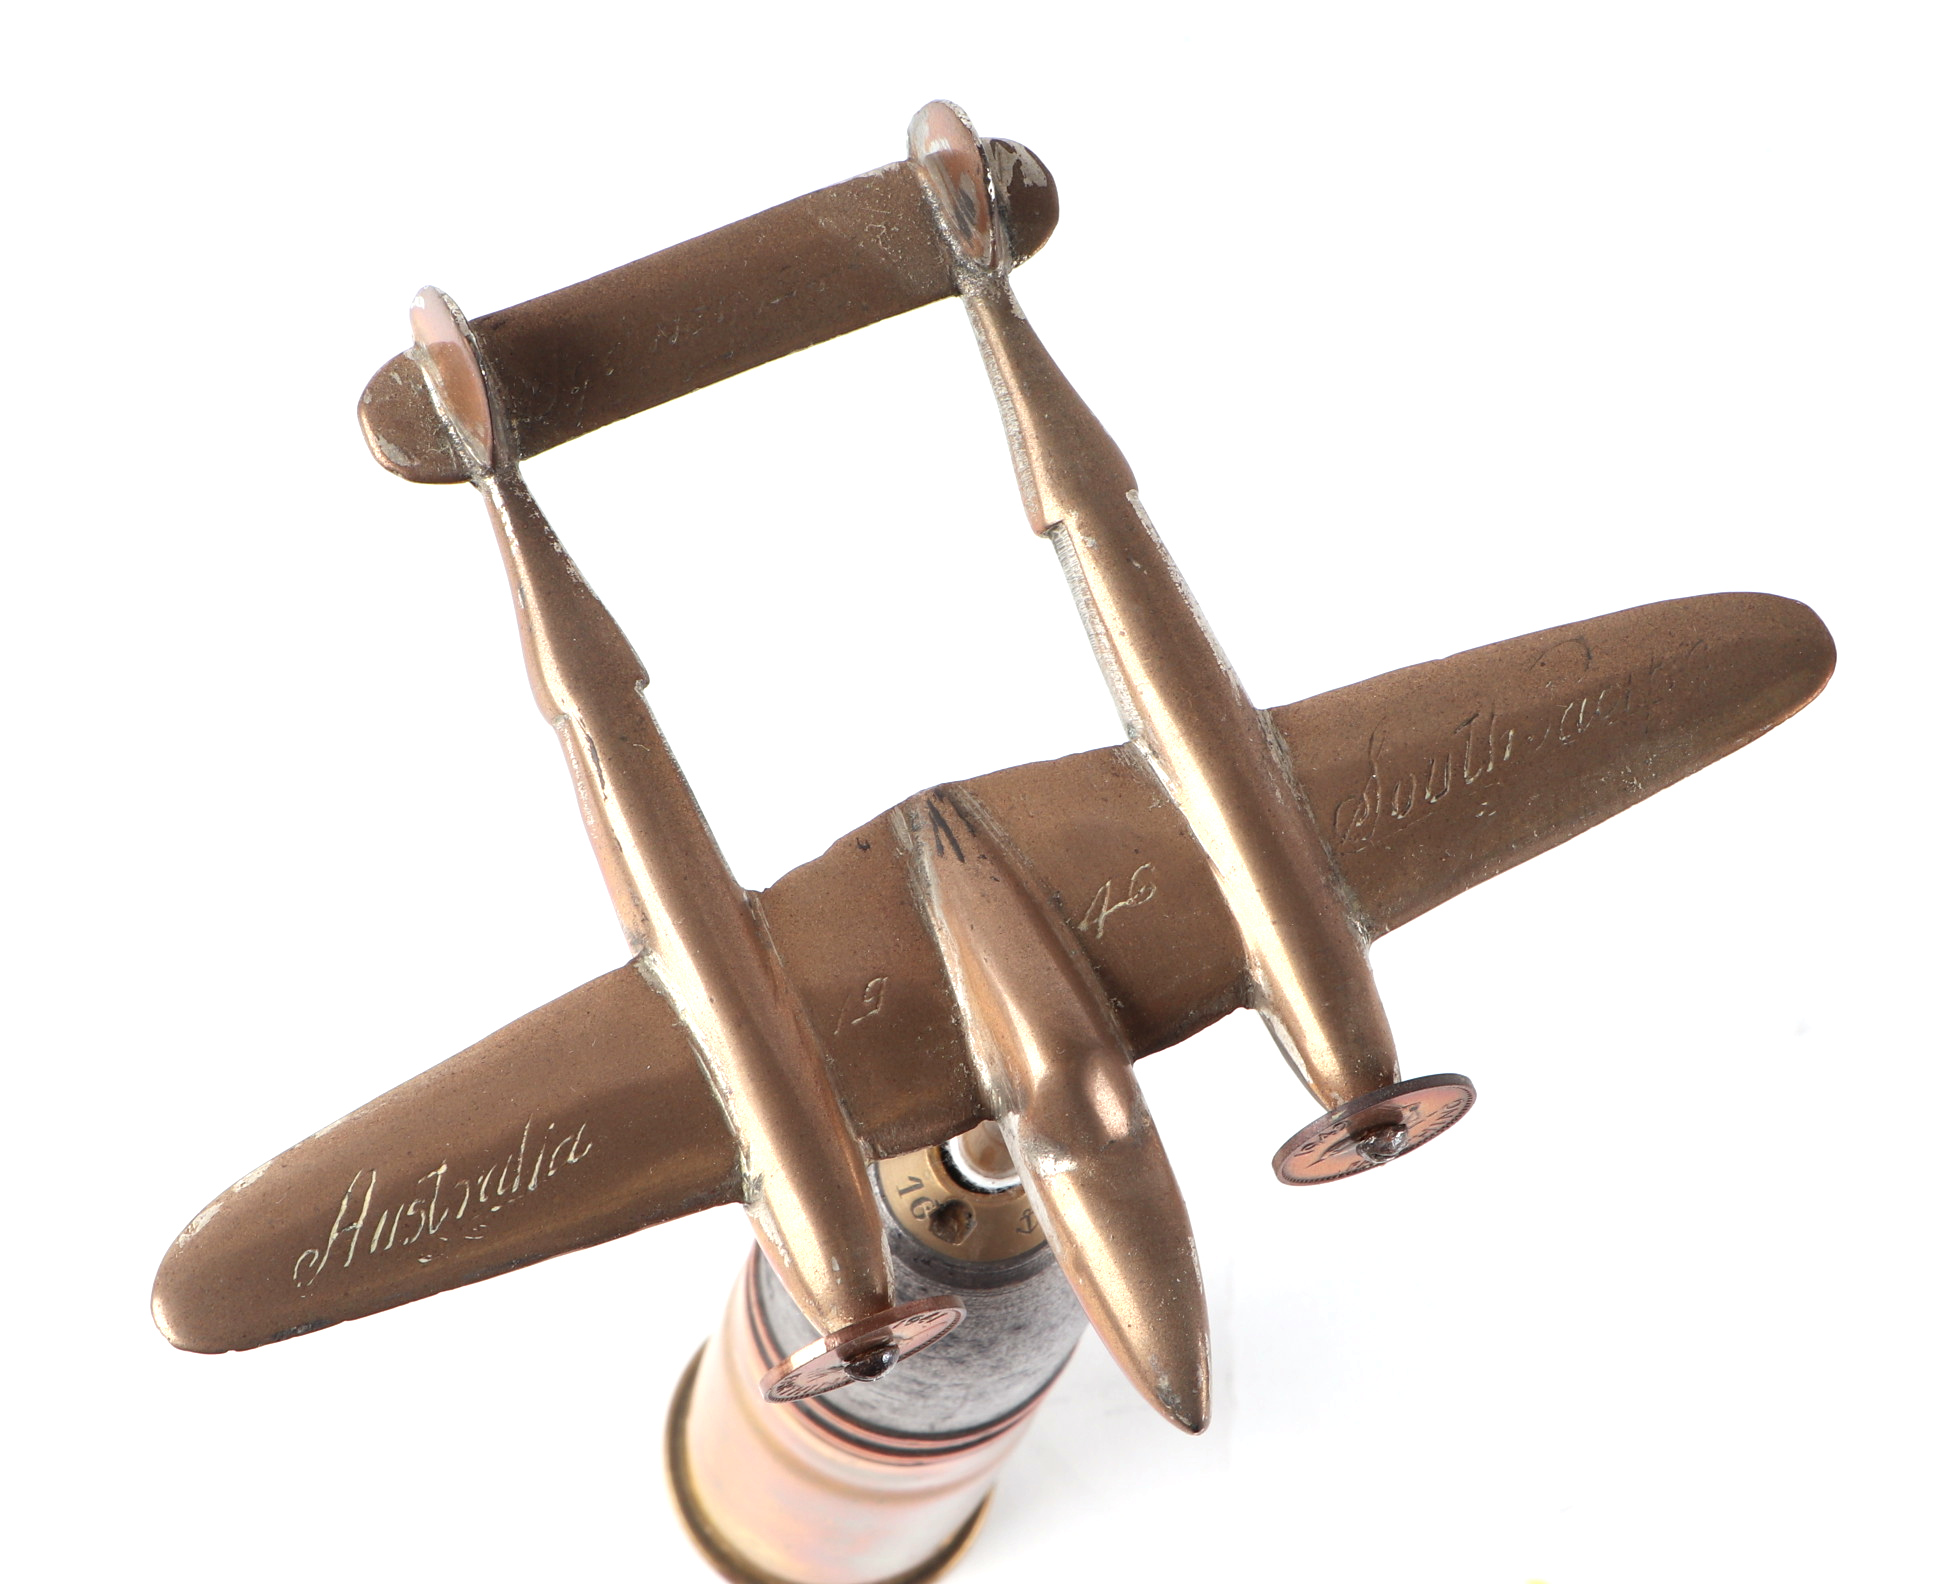 A trench art cast brass model of a Lockheed P-38 Lighting, mounted on a shell case, wingspan 16cm. - Image 2 of 2